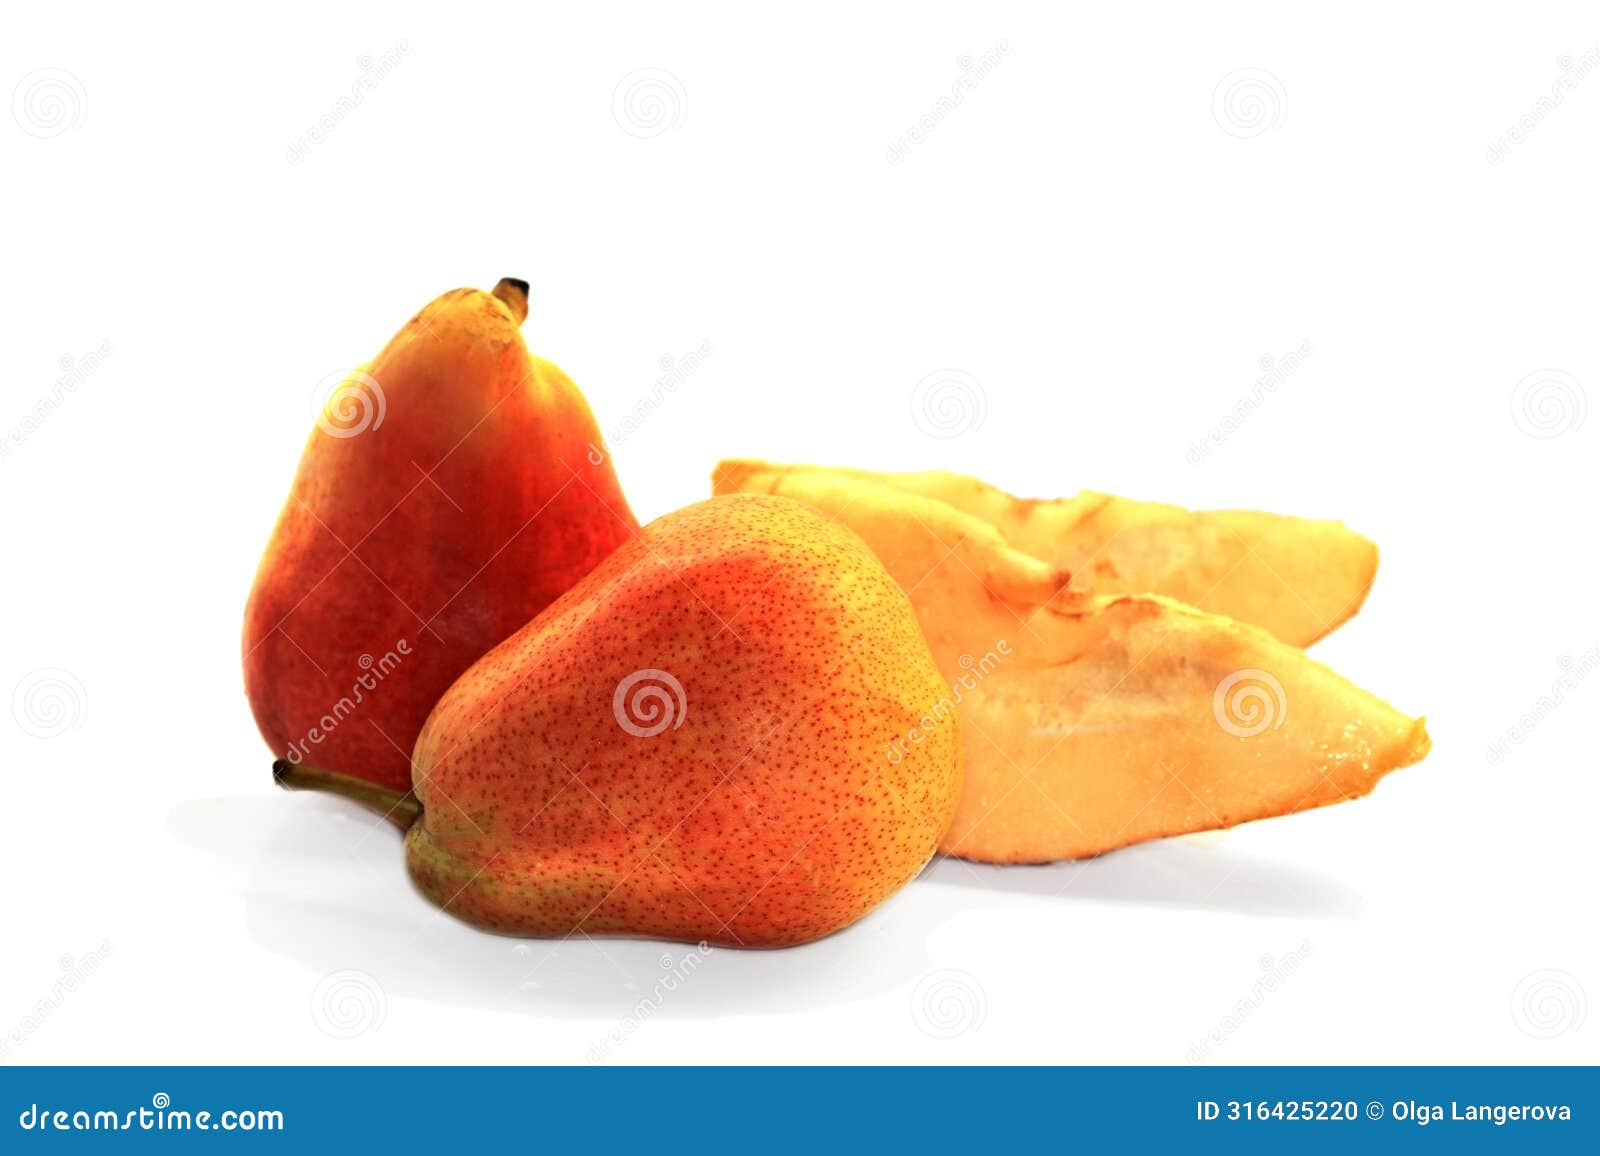 juicy fresh pears on a white background